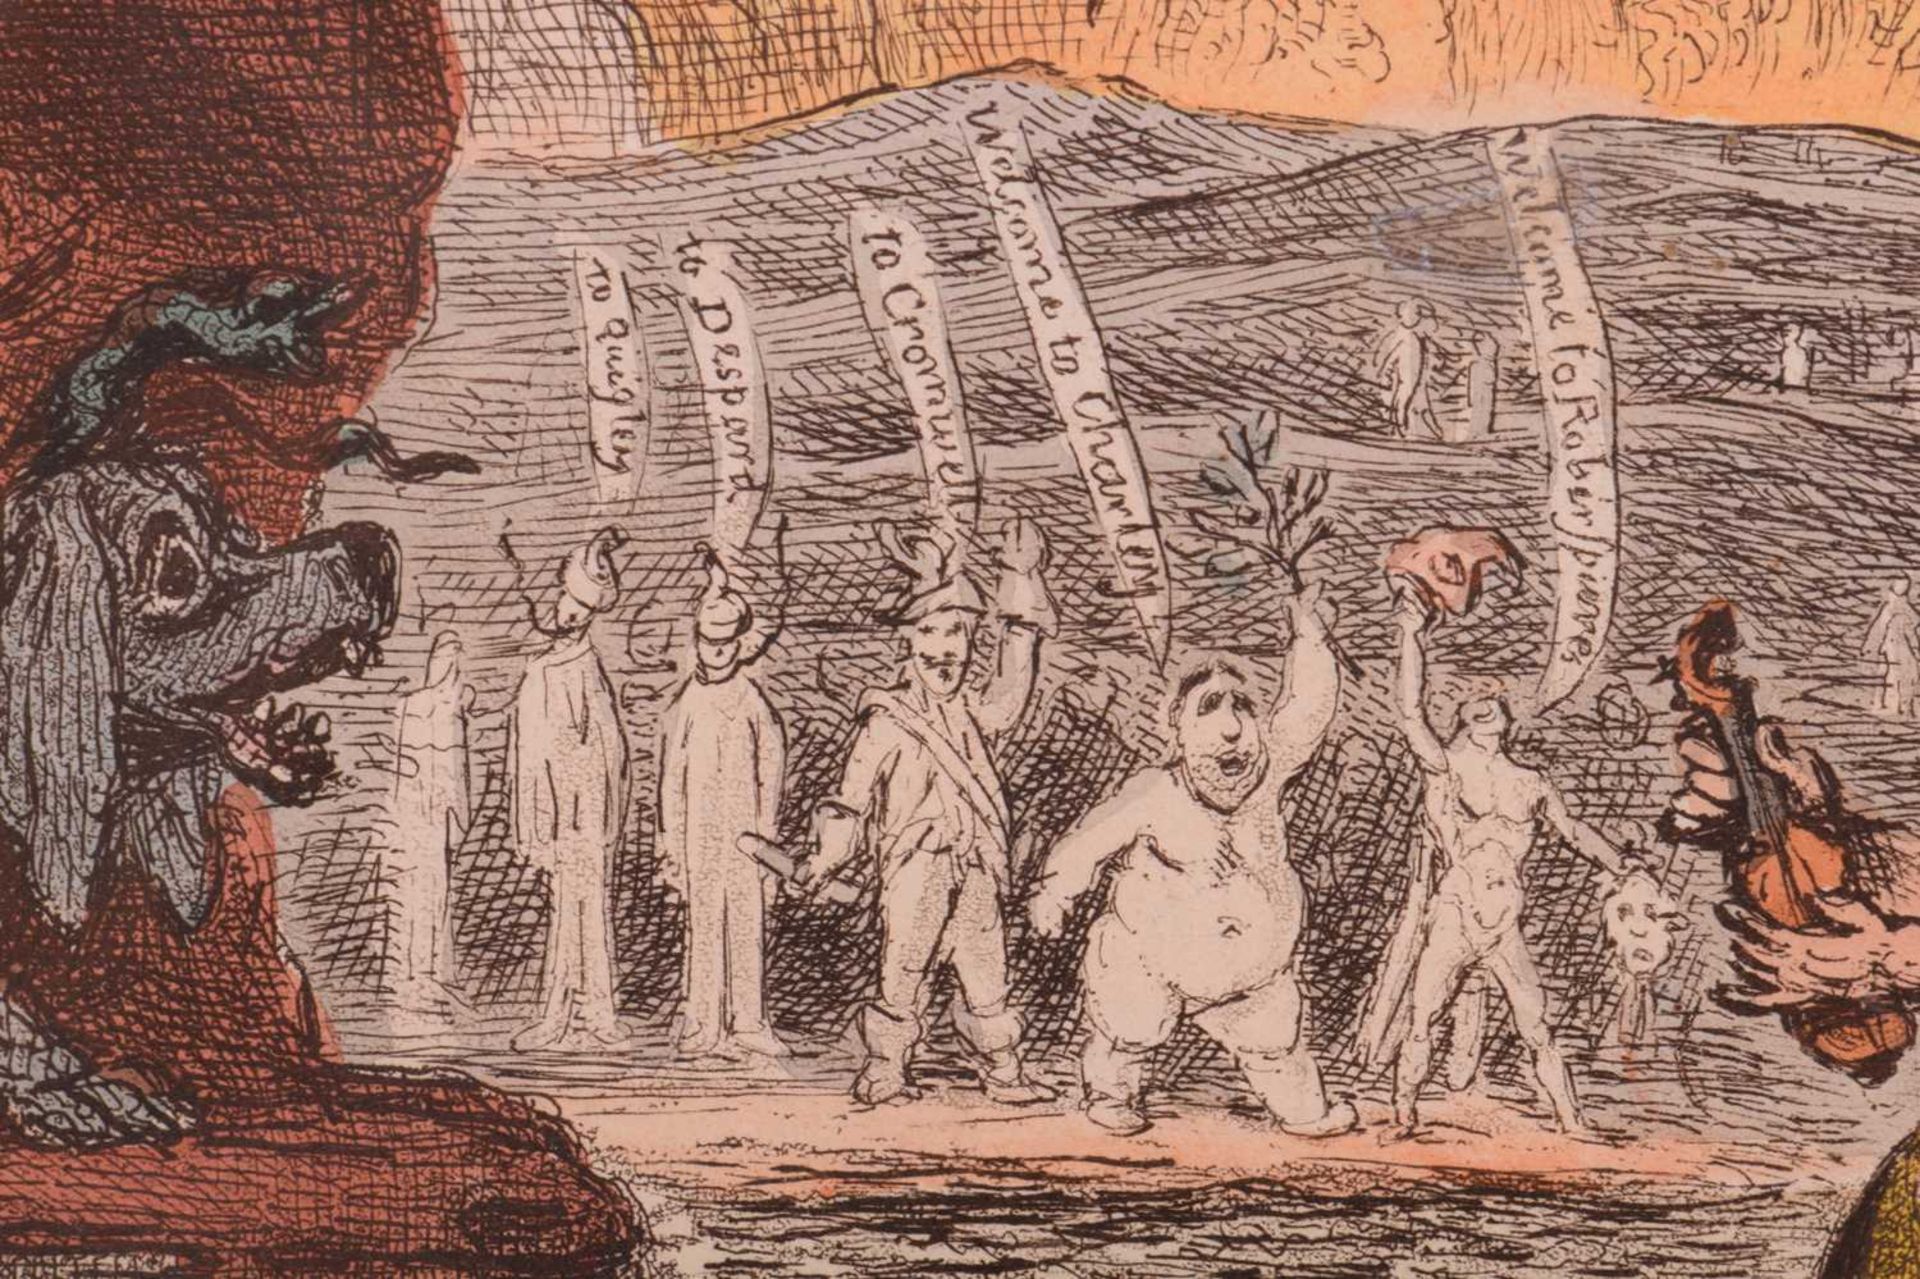 After James Gillray (1756-1815), 'Charon's Boat or the Ghosts of "all the Talents" taking their last - Image 8 of 16